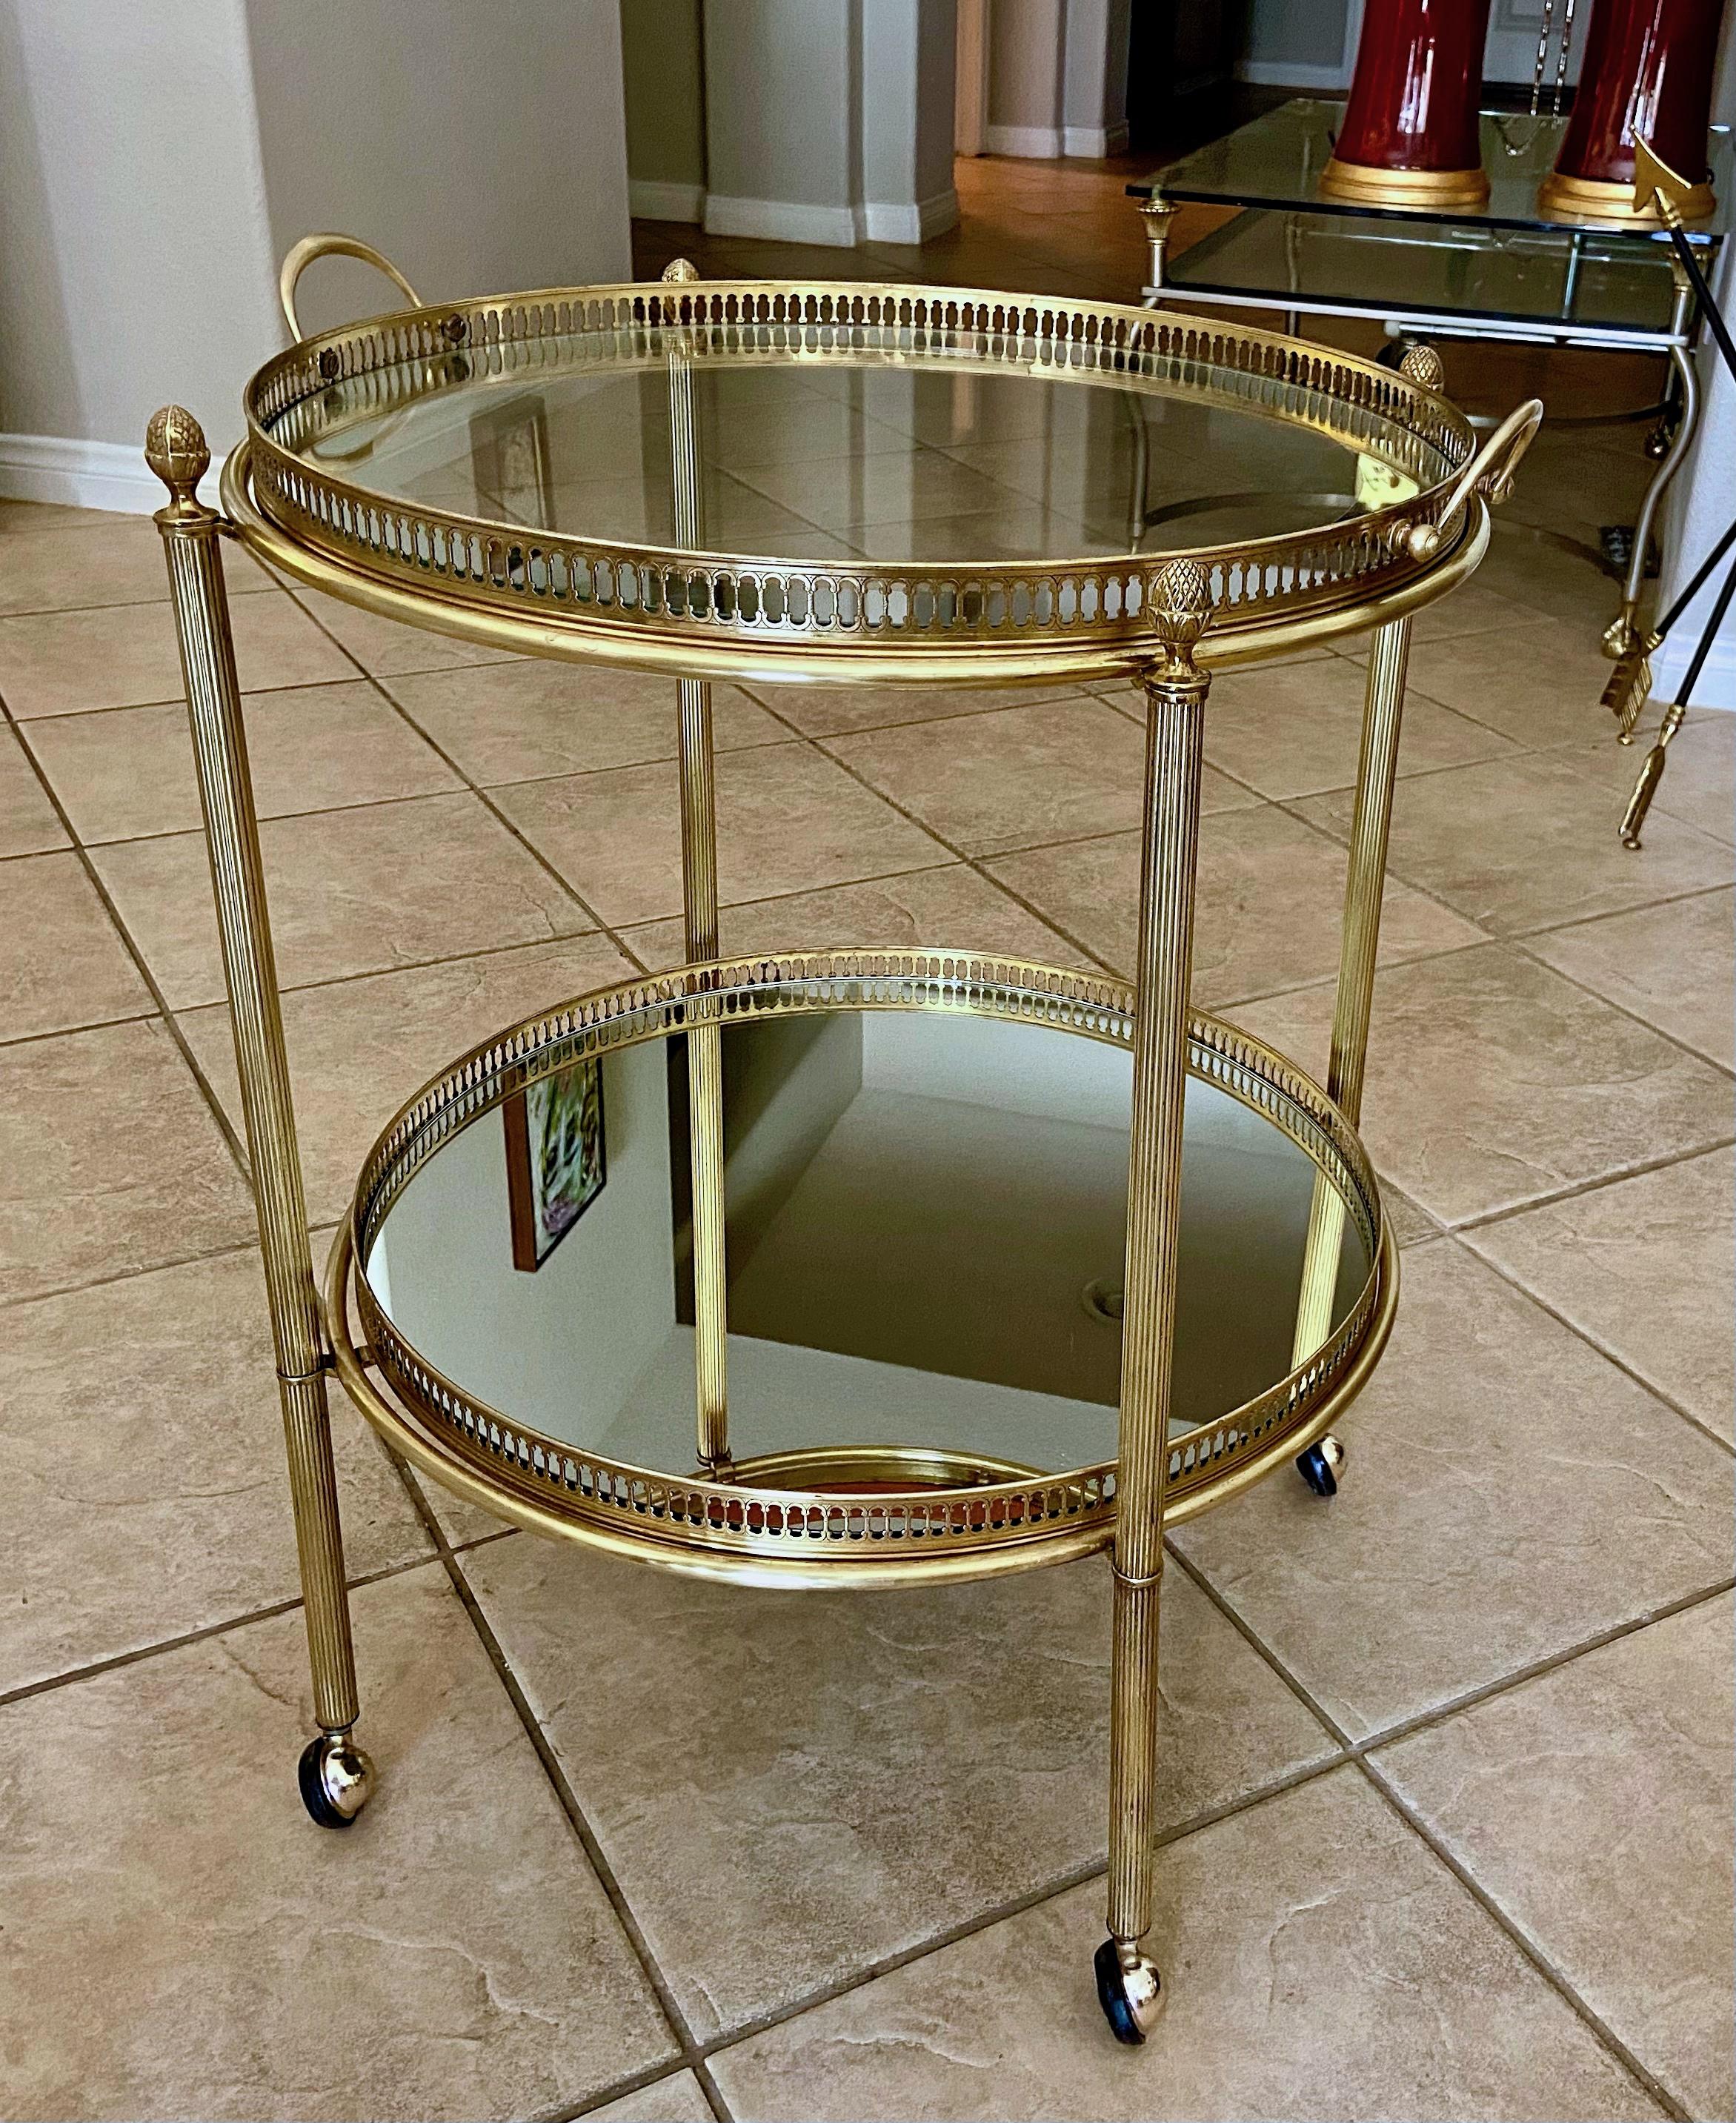 French brass round bar or tea cart with reeded legs, decorative pierced gallery rails and pomegranate finials. The trays are removable, the bottom tray is has an inset mirrored glass, the top tray is mirrored edge with clear glass center.